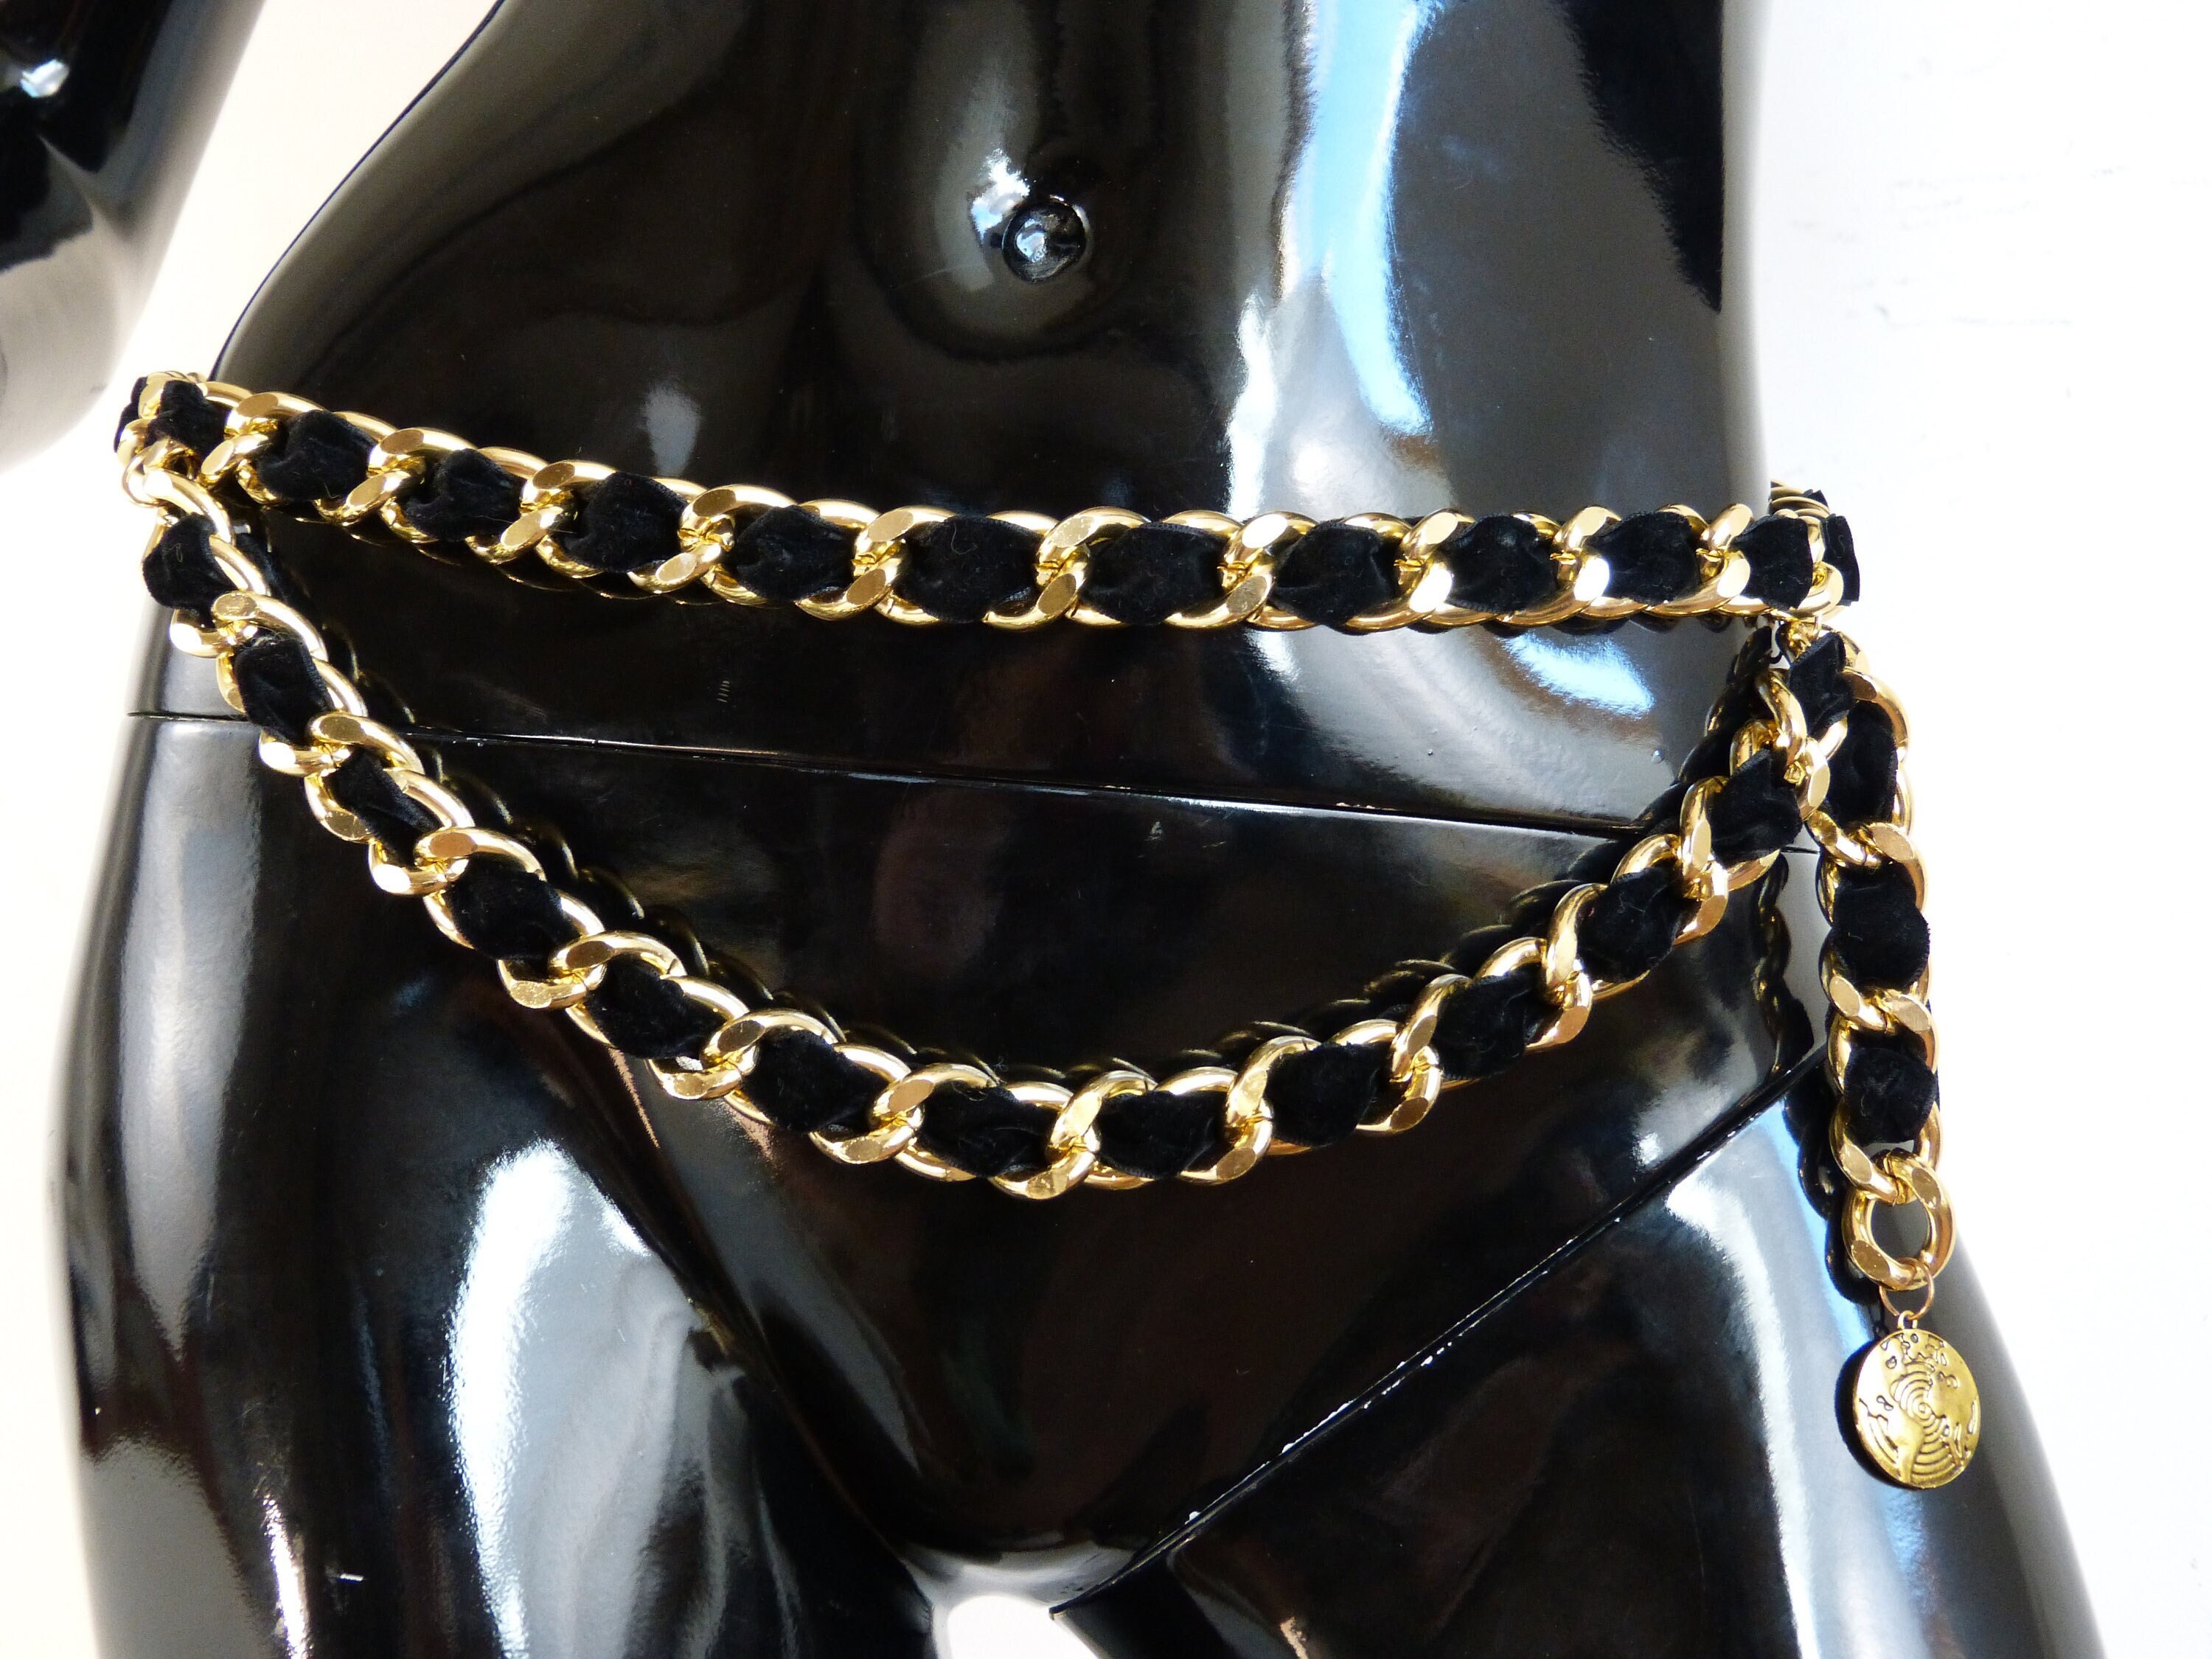 2 strands gold tone metal chain belt with black velvet ribbon details -  chunky hip hop inspired 1990s fashion accessory - French 90s vintage